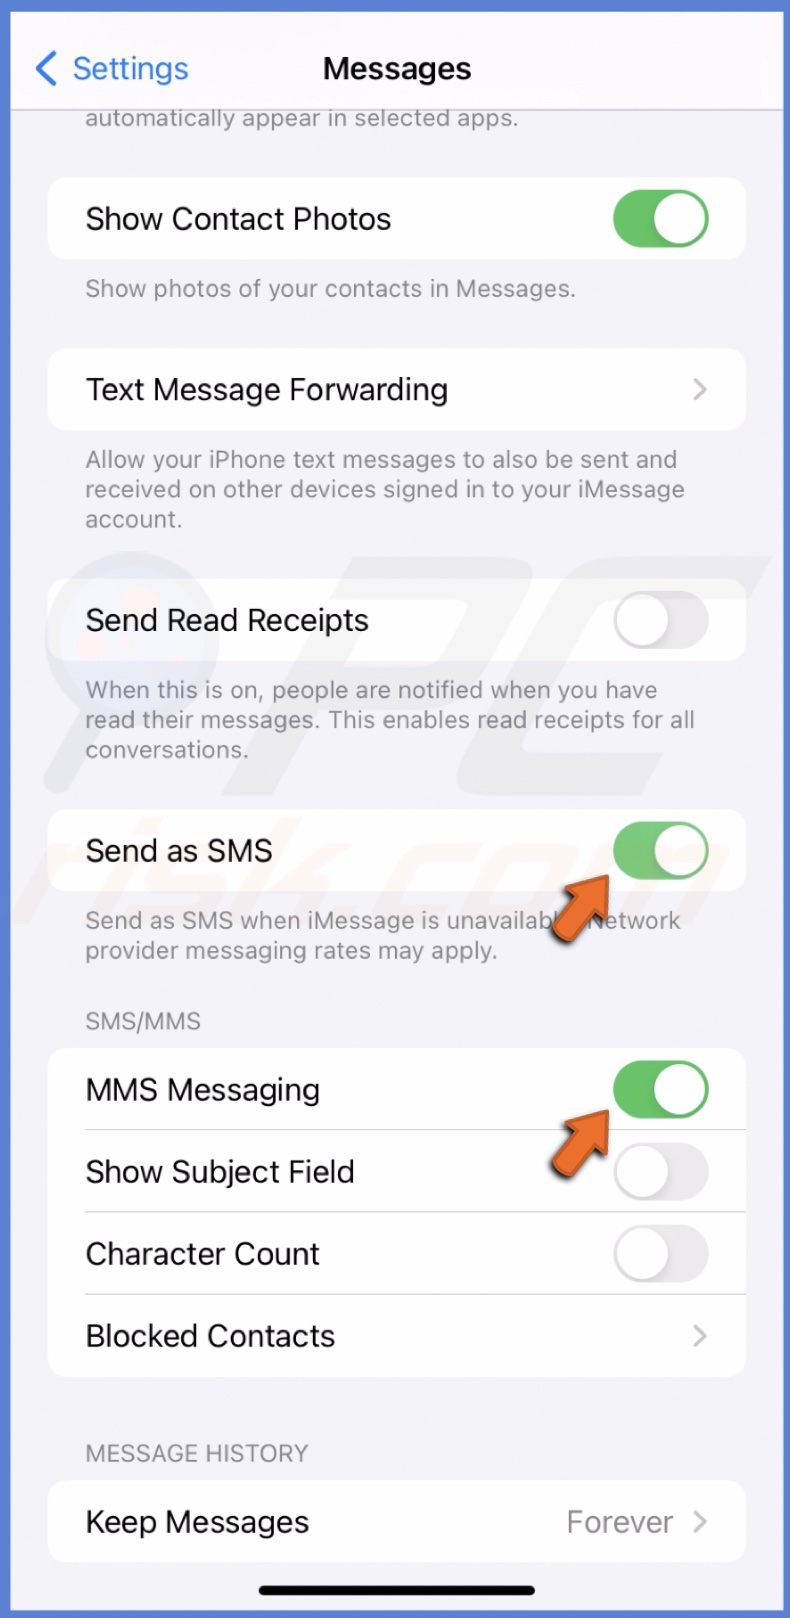 Enable SMS and MMS